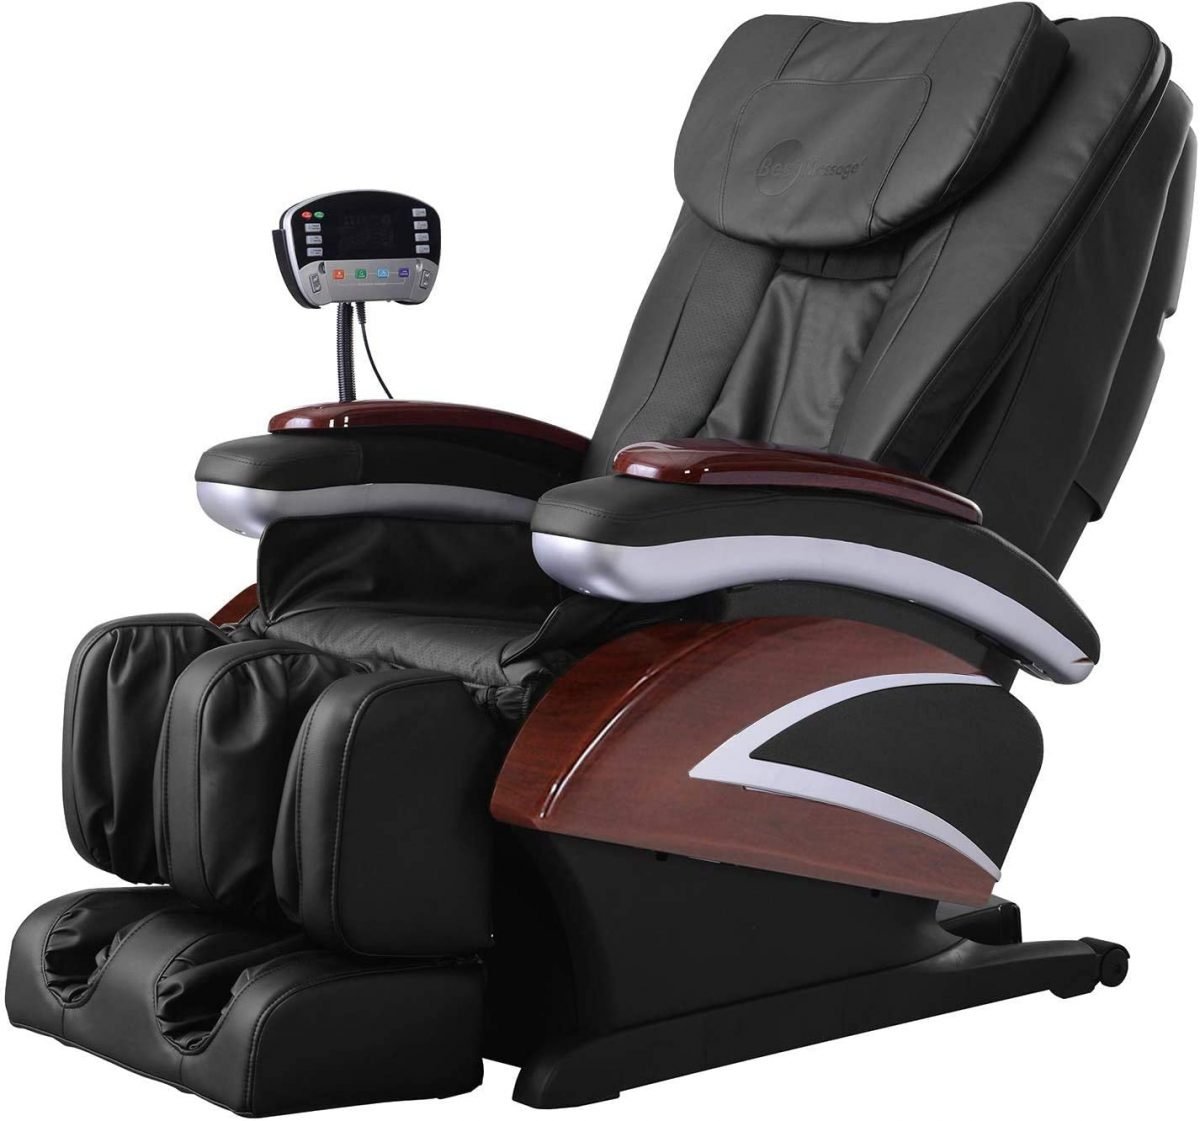 Best Massage Chair Reviews And Buying Guide - Best Home Gym Equipment